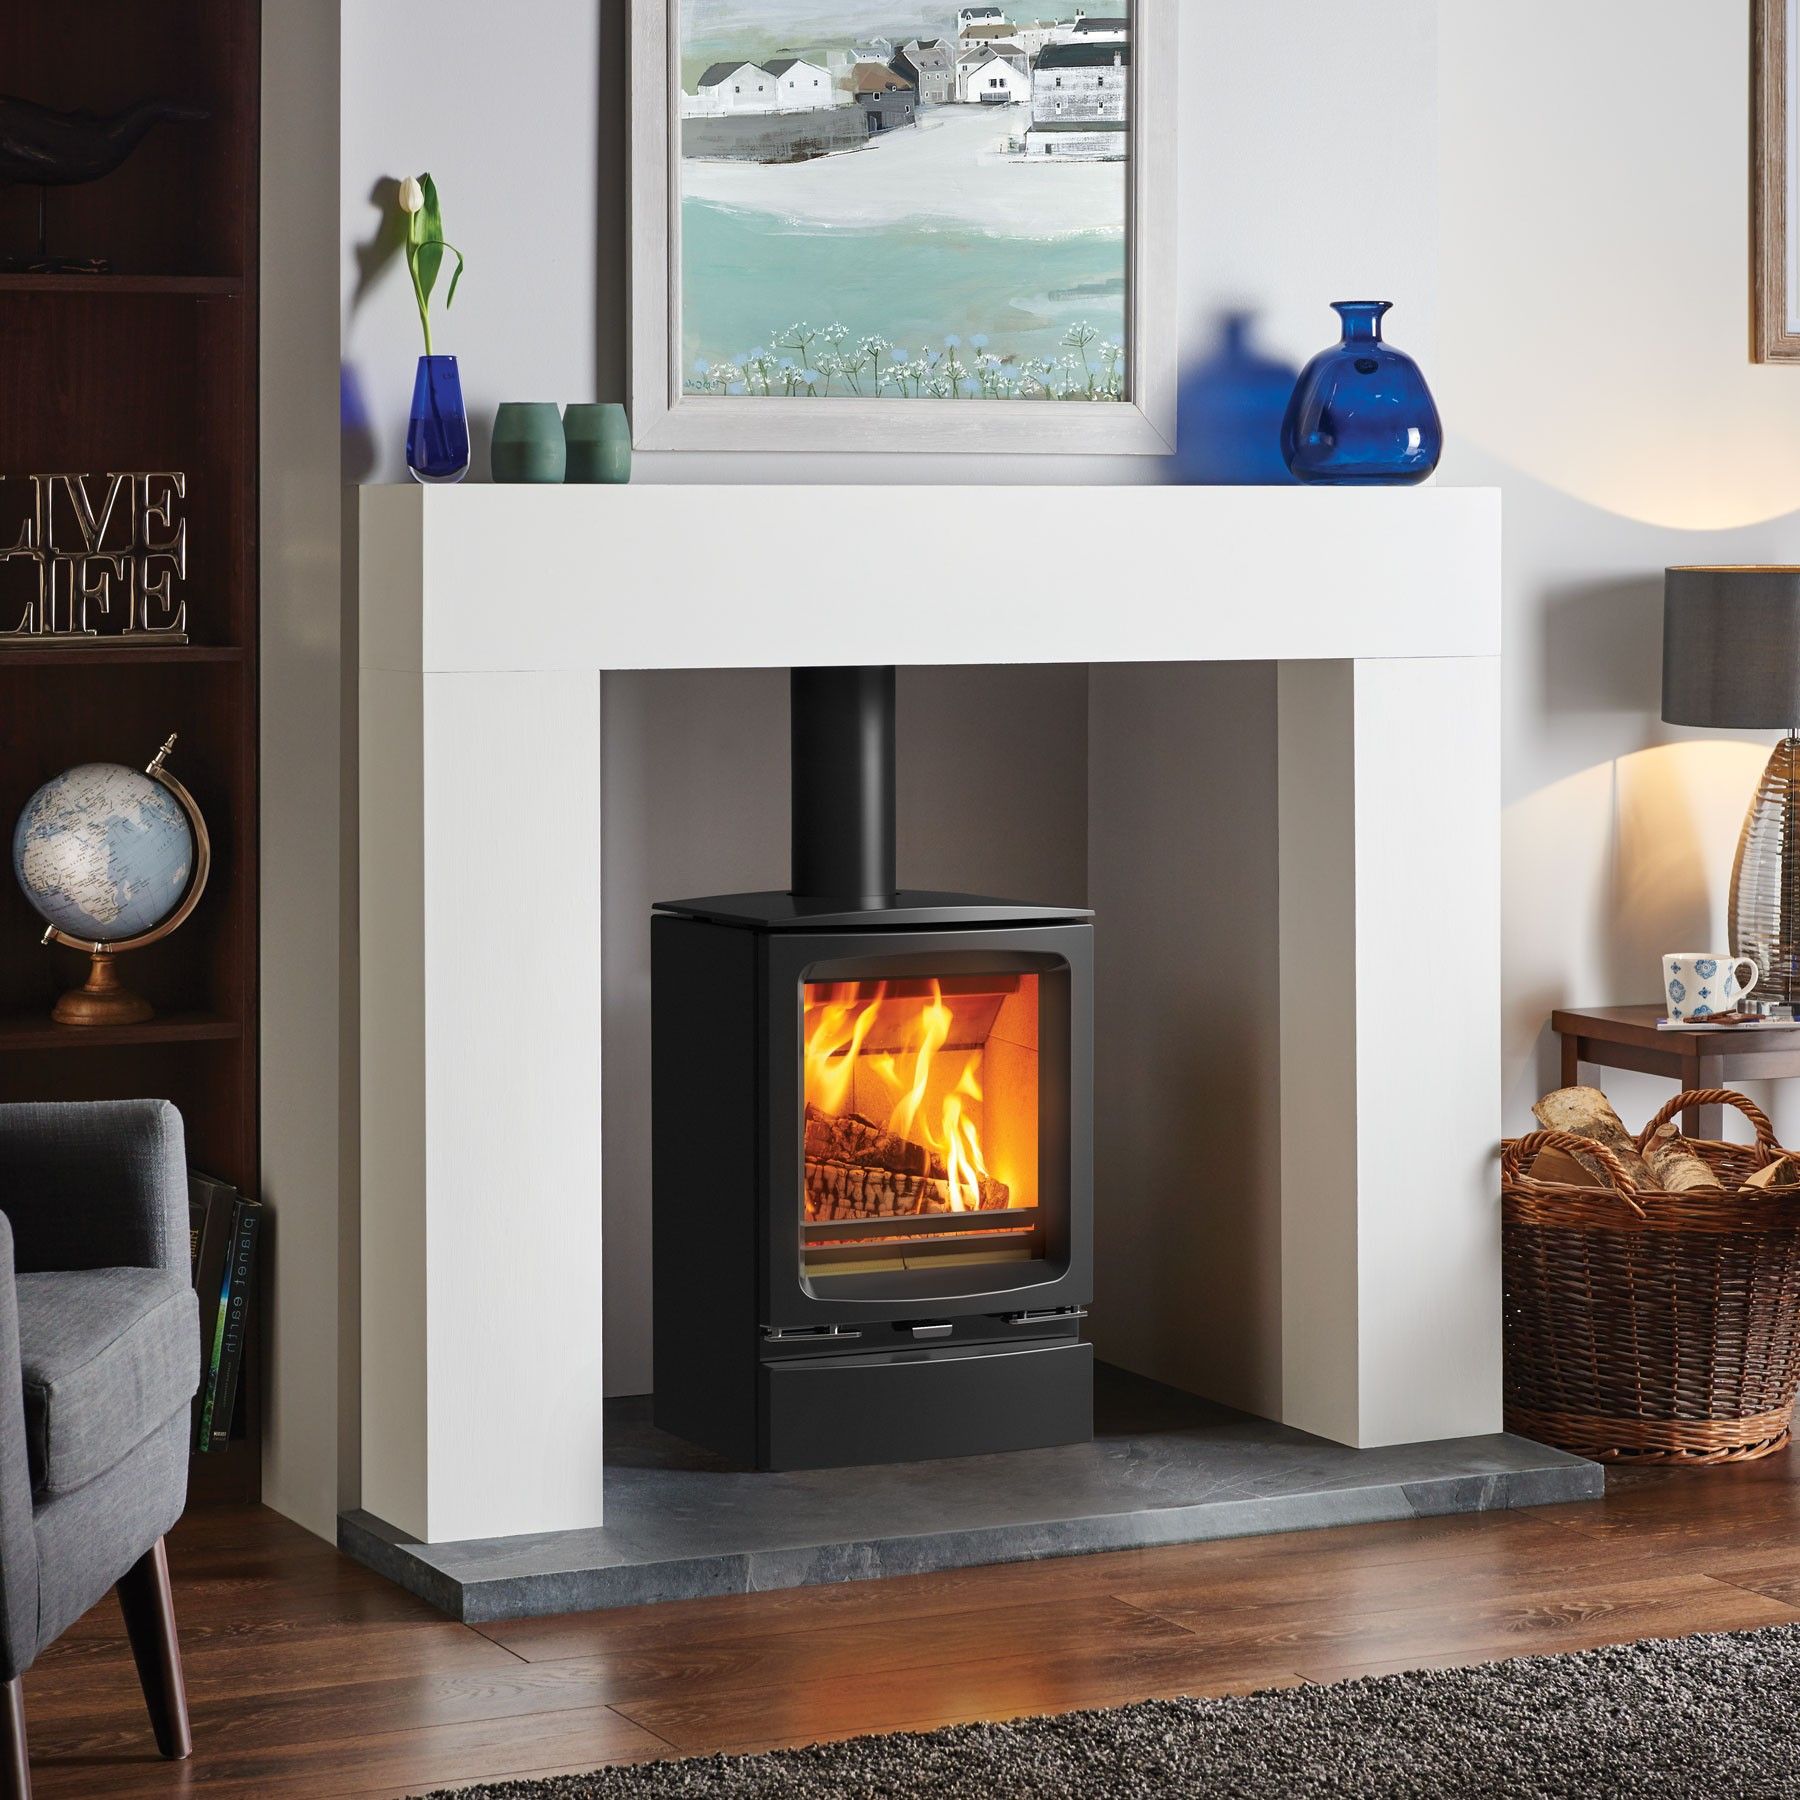 Different Types Of Fireplaces Inspirational Wood Burners Wood Fire Surrounds for Wood Burners